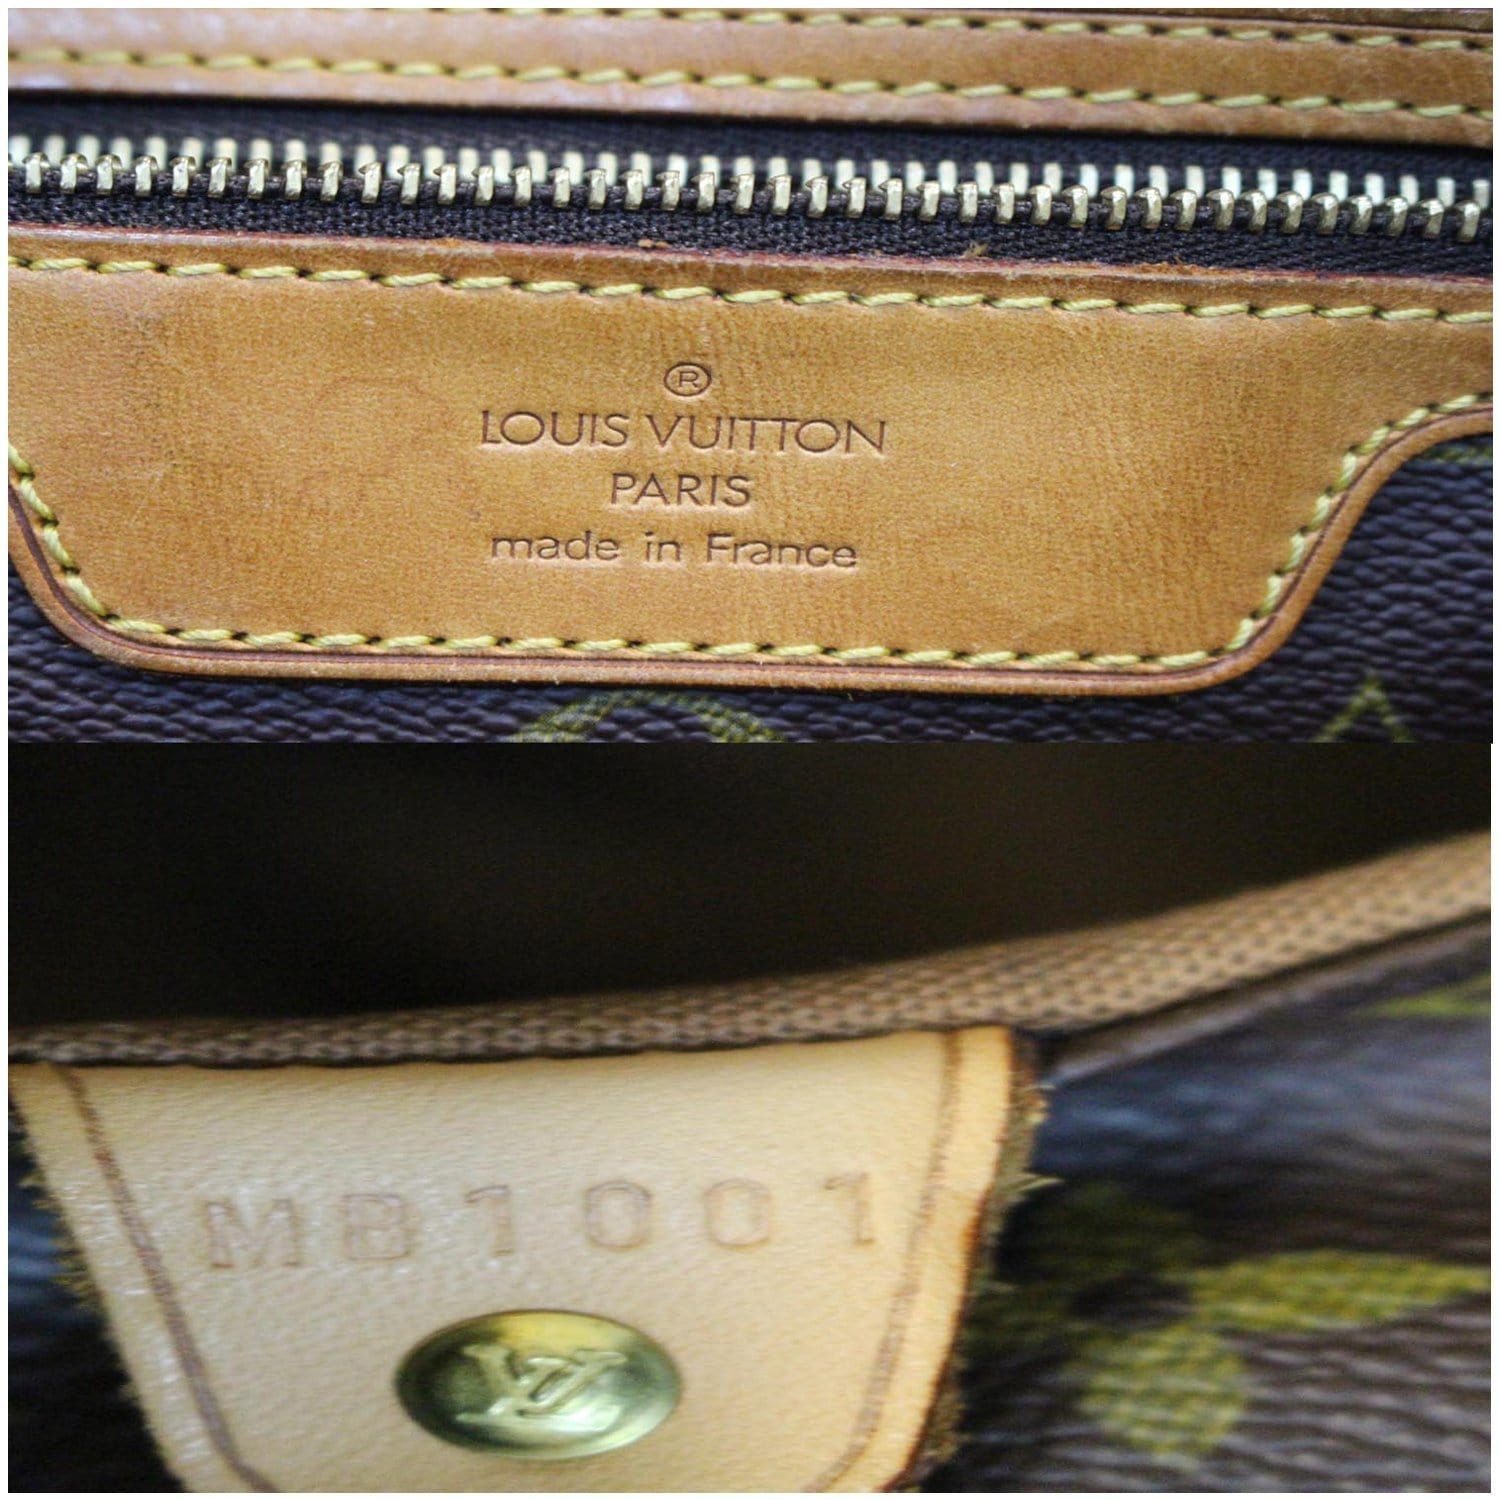 lv made in france code